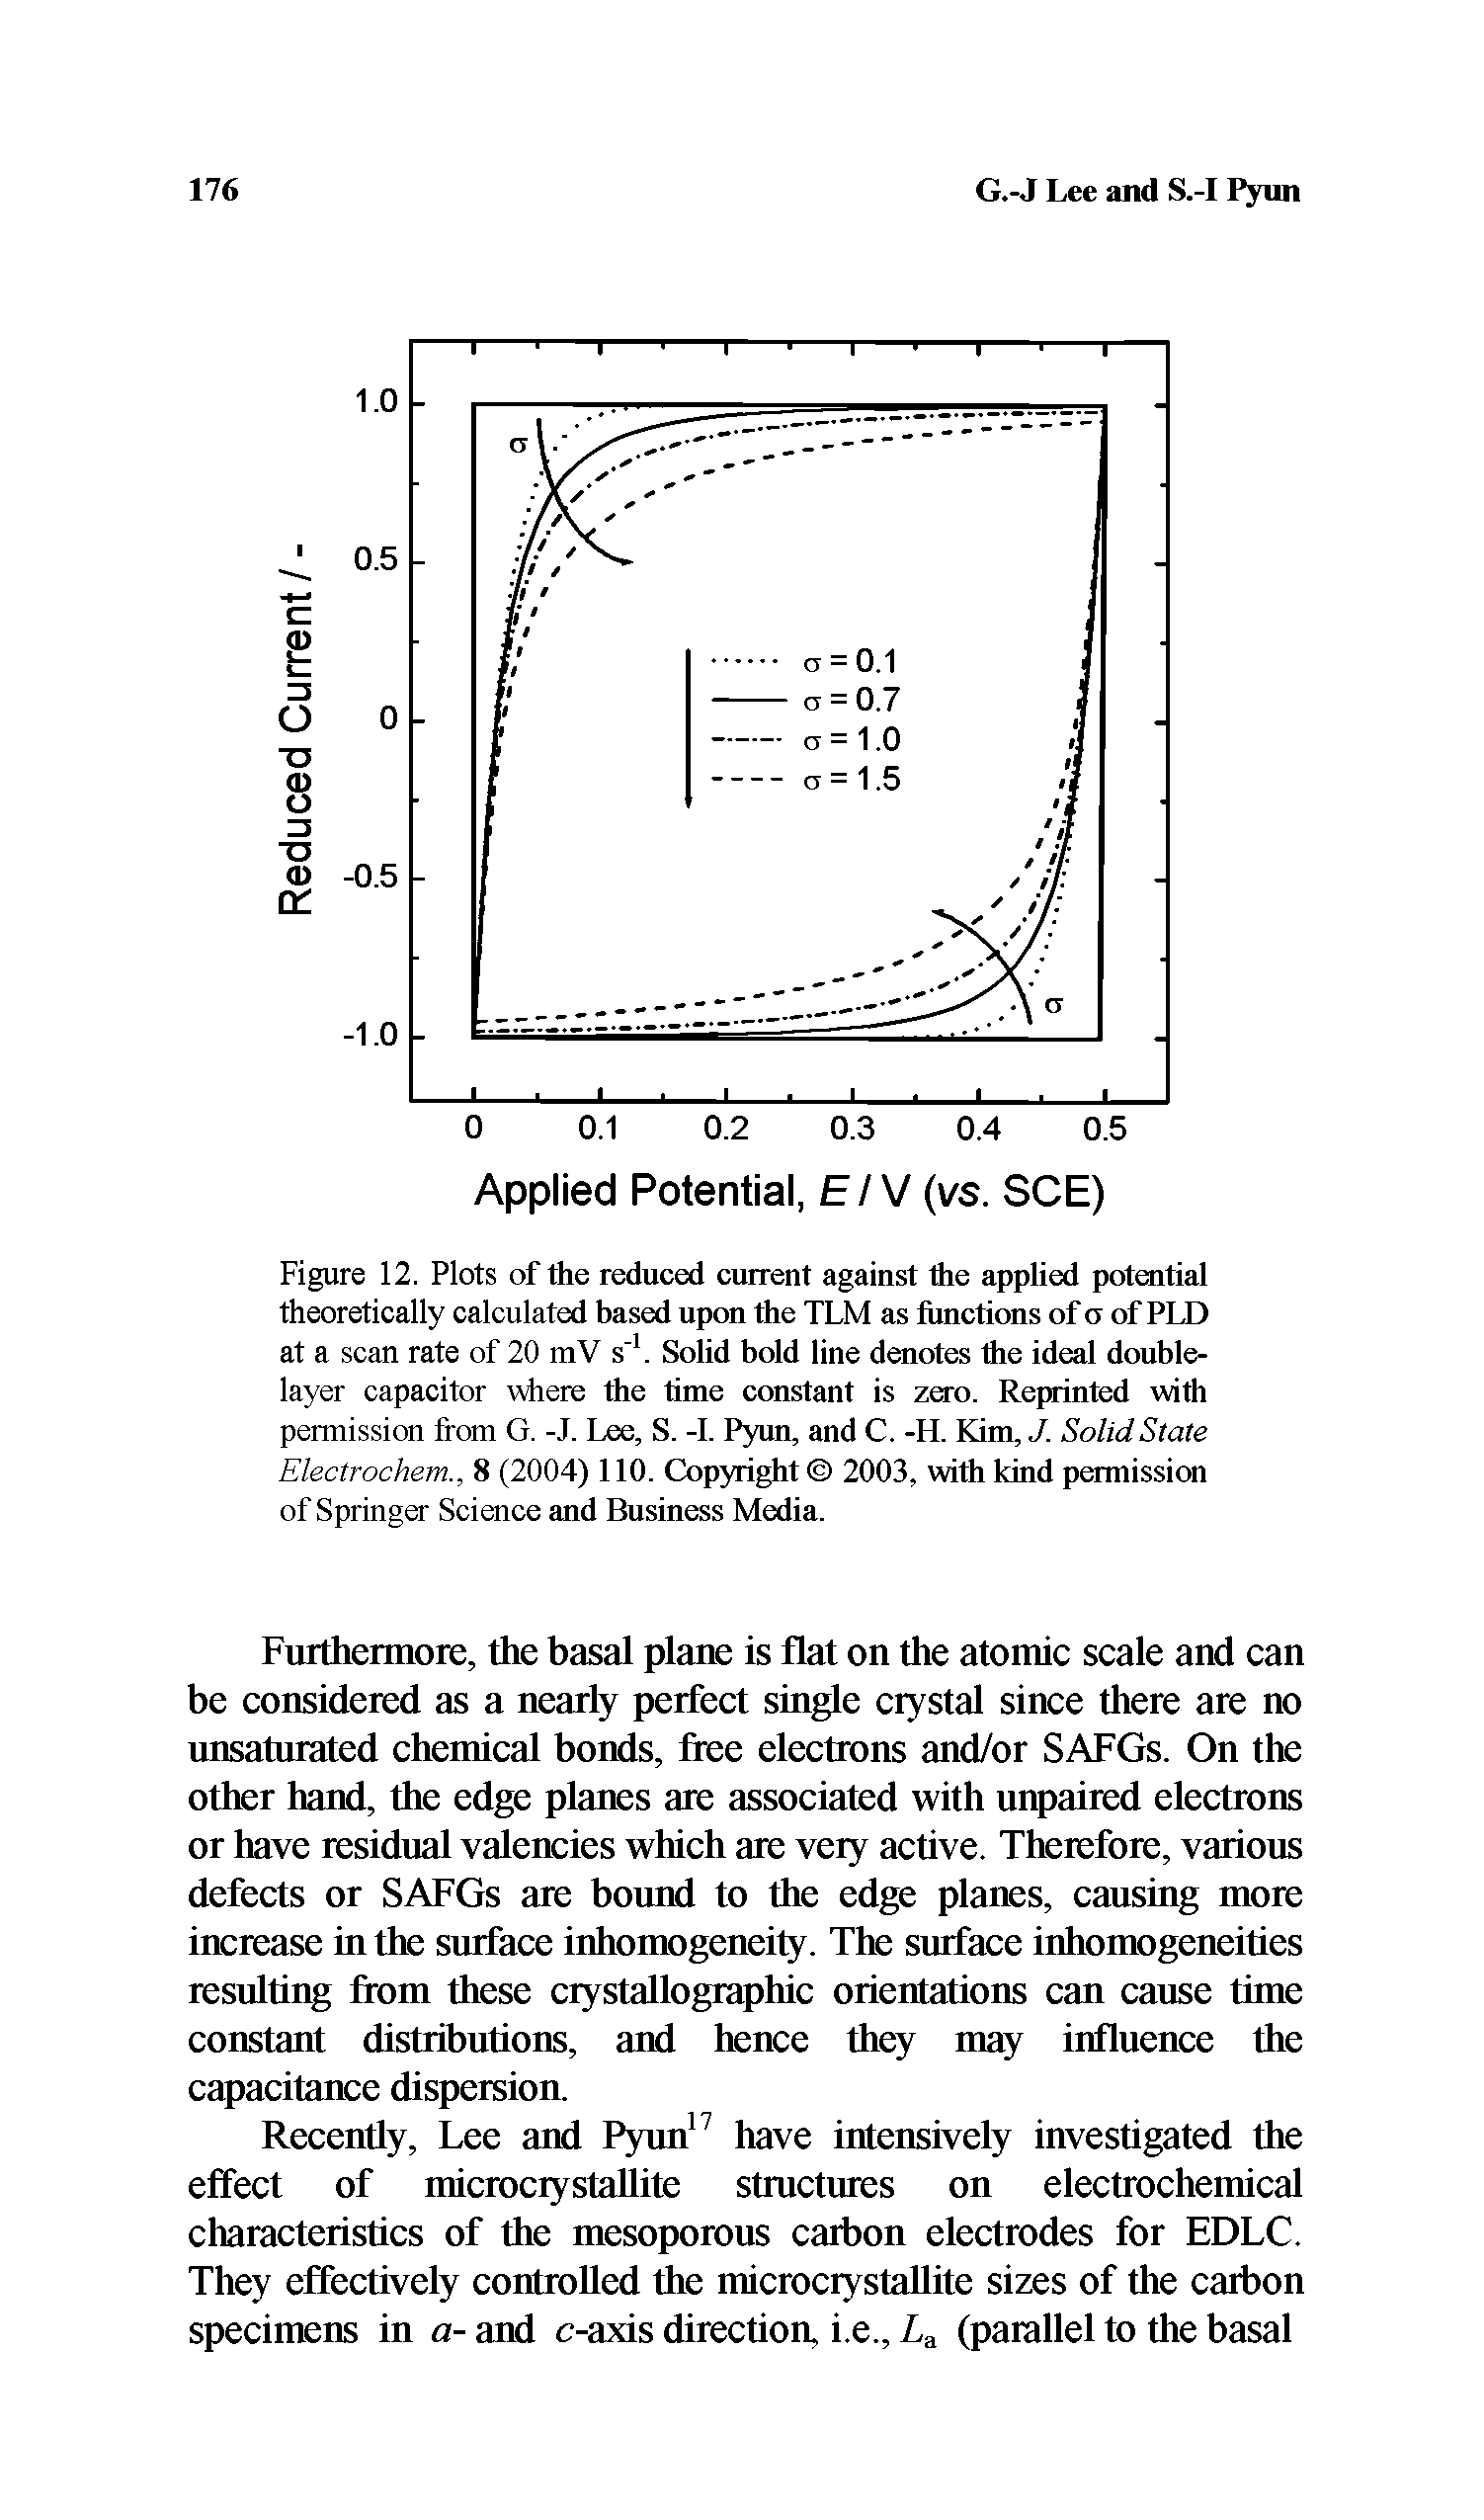 Figure 12. Plots of the reduced current against the applied potential theoretically calculated based upon the TLM as functions of o of PLD at a scan rate of 20 mV s 1. Solid bold line denotes the ideal doublelayer capacitor where the time constant is zero. Reprinted with permission from G. -J. Lee, S. -I. Pyun, and C. -H. Kim,./. Solid State Electrochem., 8 (2004) 110. Copyright 2003, with kind permission of Springer Science and Business Media.